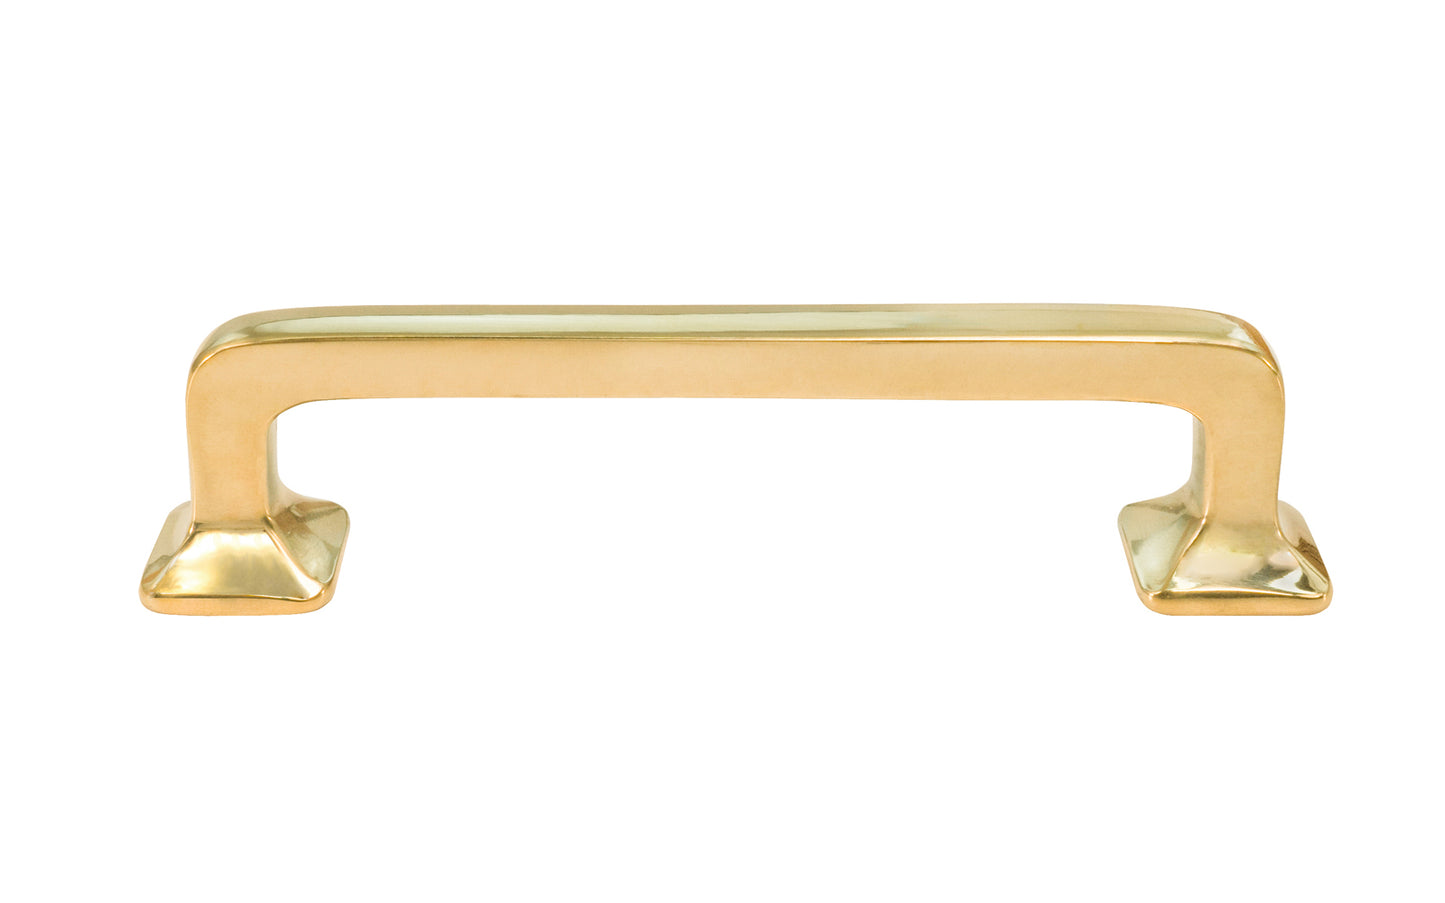 Vintage-style Hardware · Classic Solid Brass Handle Pull ~ 3-1/2" On Centers. Mission-Style / Arts & Crafts style. Unlacquered brass (will patina naturally over time). 3-1/2" center to center pull. solid brass kitchen cabinet pull. Drawer pull handle. Authentic reproduction hardware.